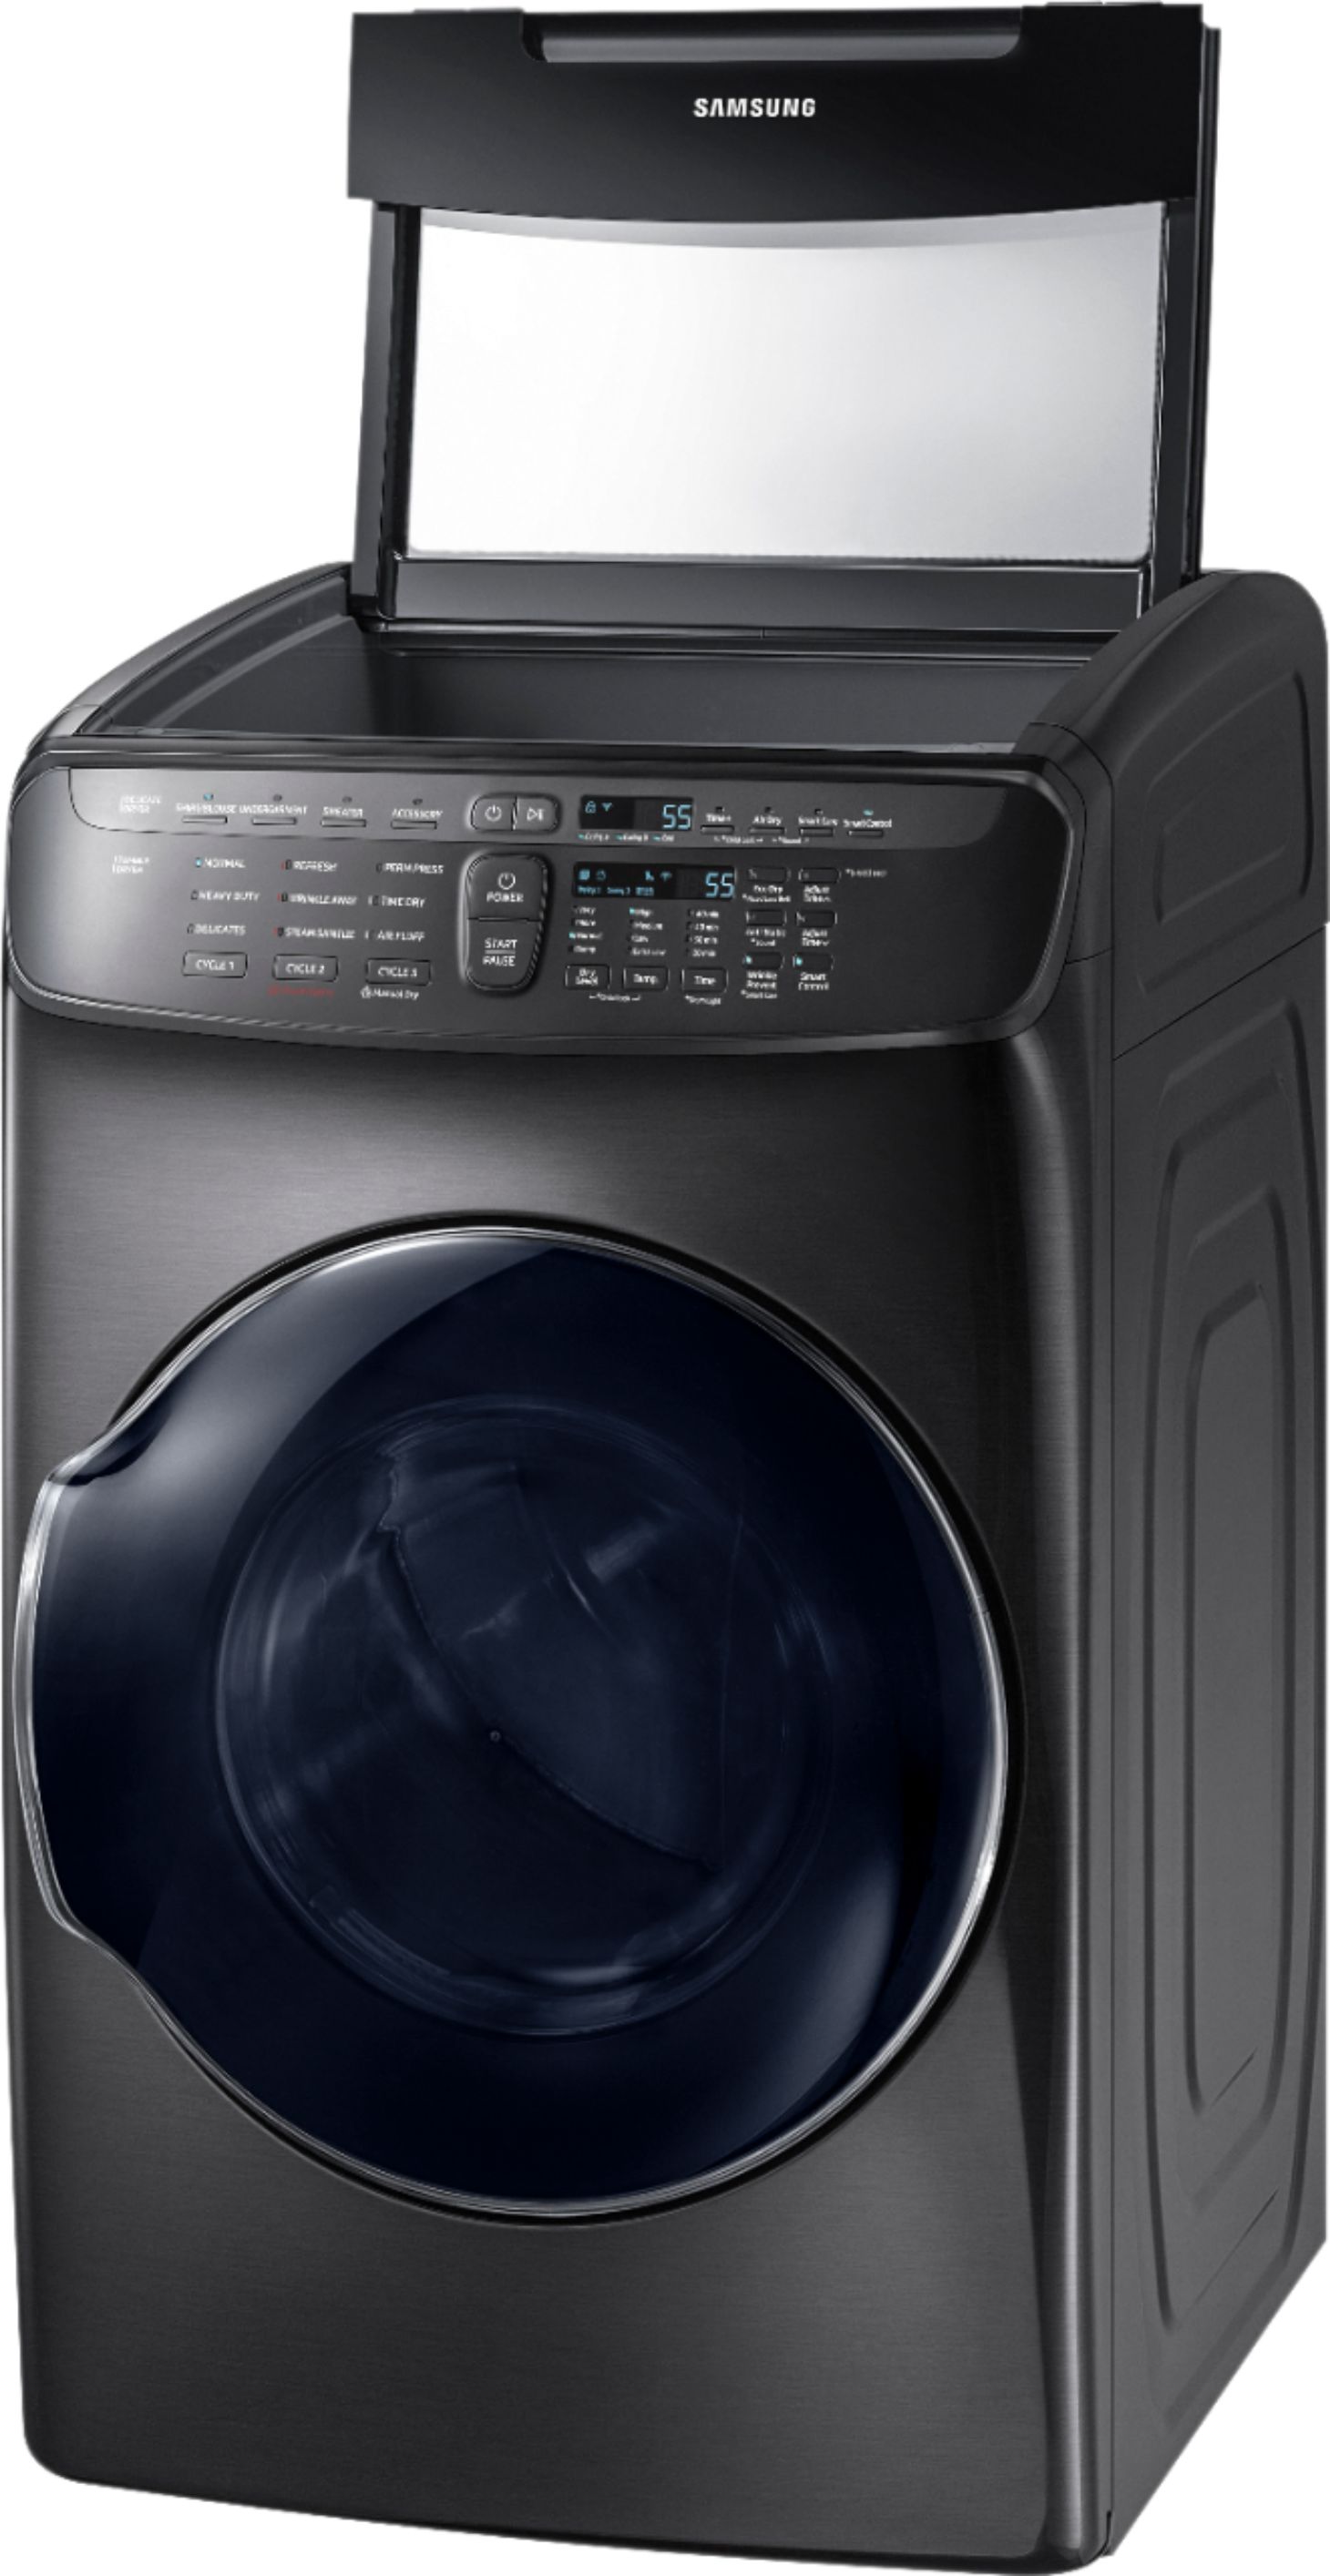 Left View: Samsung - 7.5 Cu. Ft. Gas Dryer with Steam and FlexDry - Fingerprint Resistant Black Stainless Steel